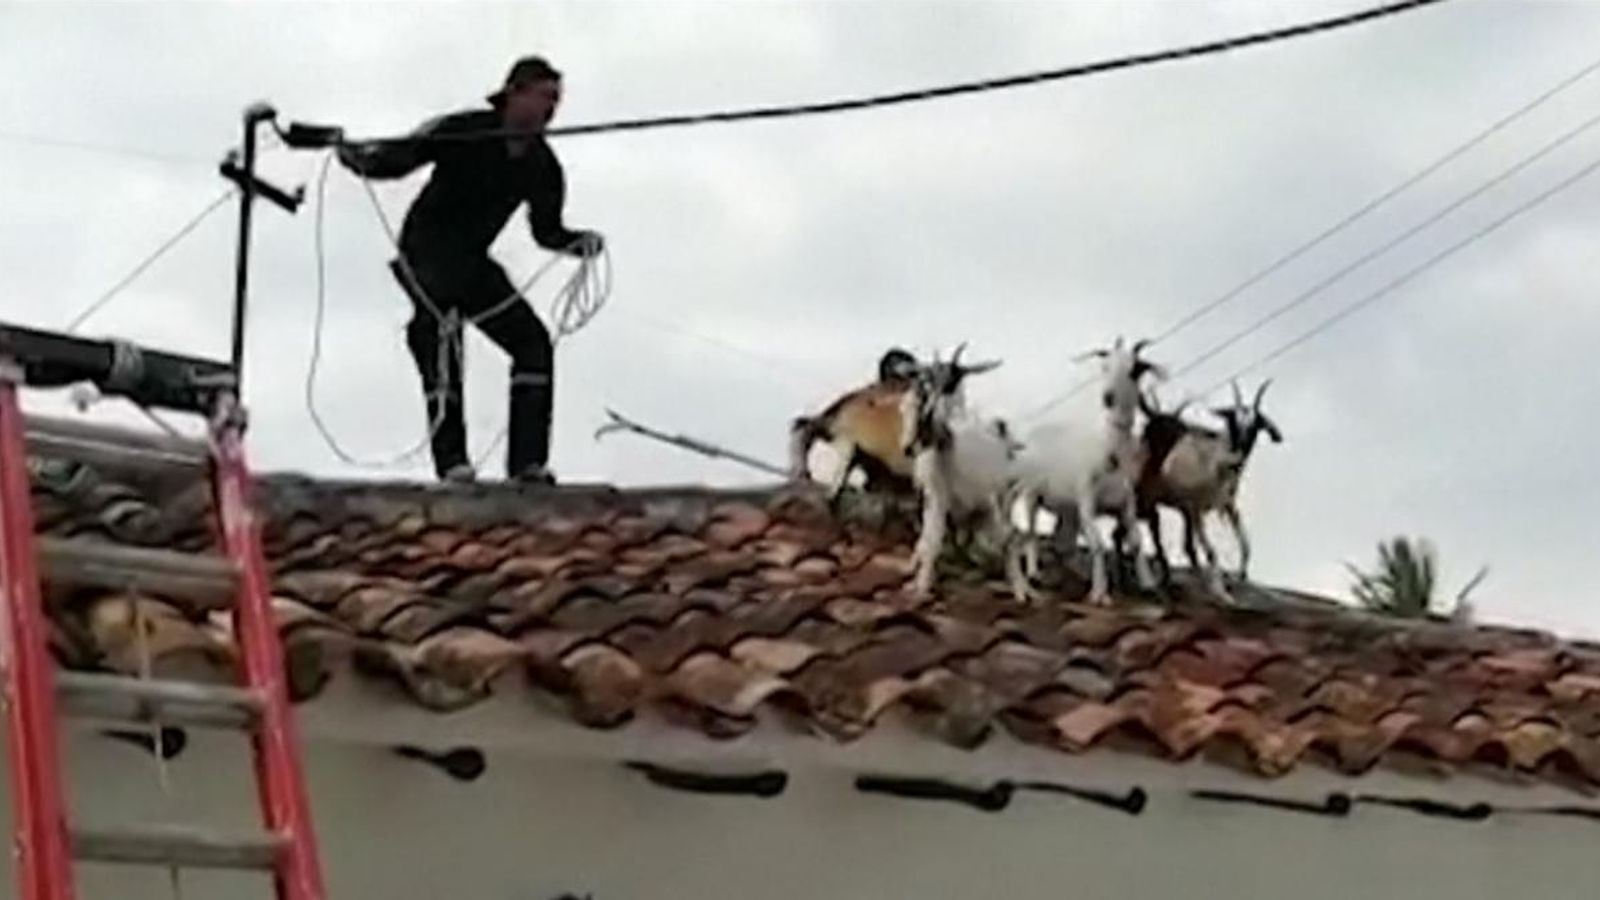 Colombia: Goats kidding around on rooftop rescued | World News | Sky News